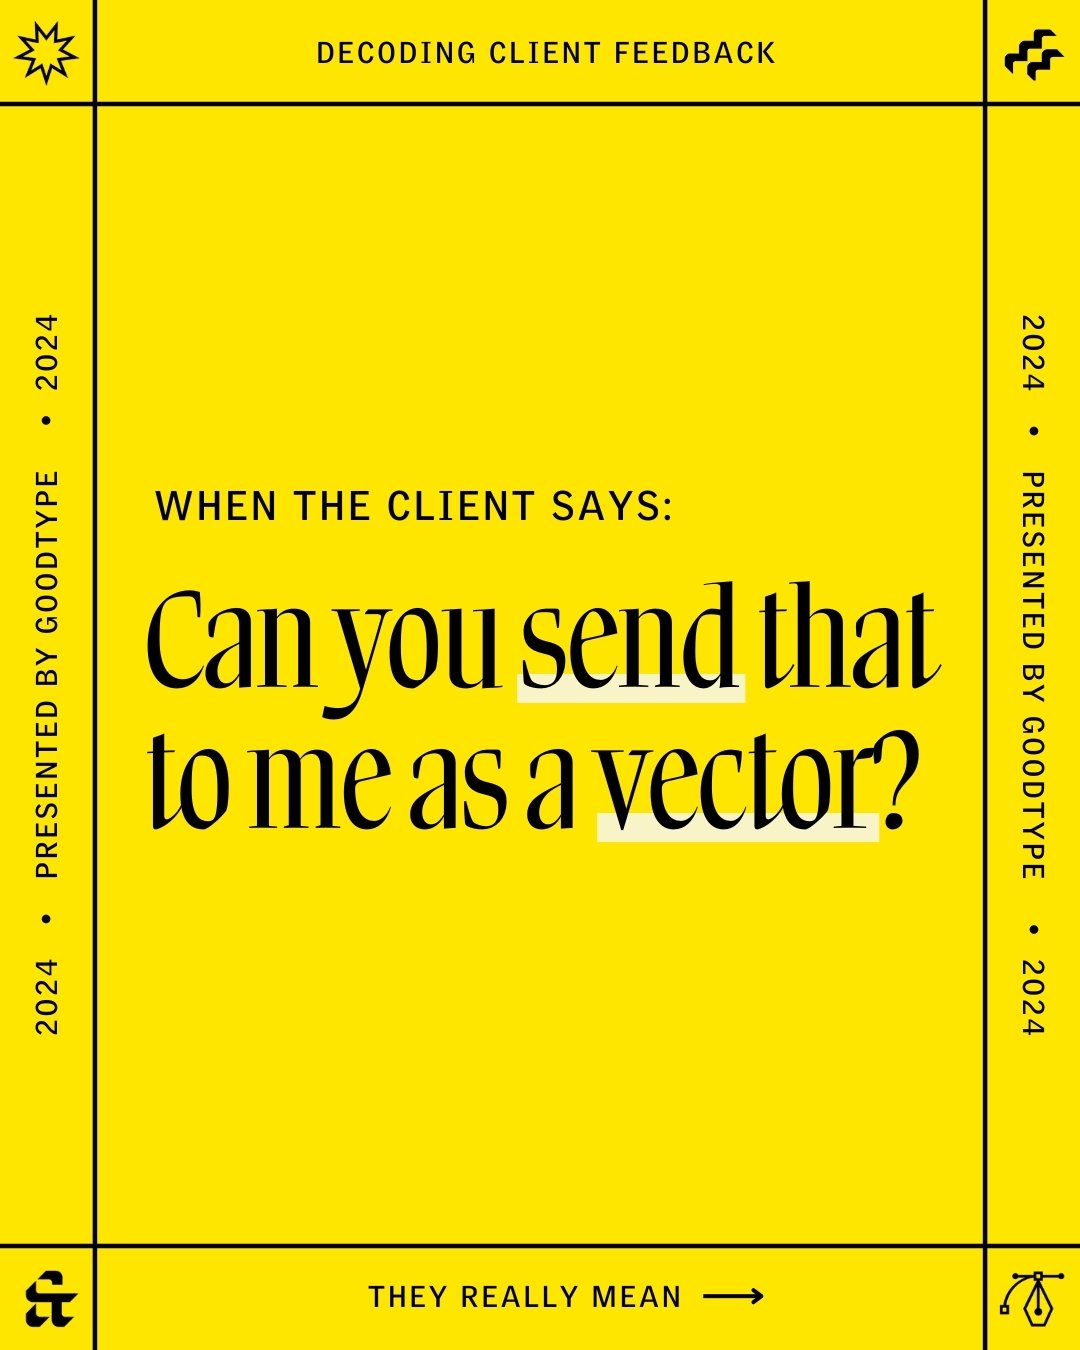 When your client asks for a vector but doesn&rsquo;t actually know what that means, here&rsquo;s what you do ➡️

What client comments or feedback should we decode next?!

Comment SLACK if you want to join our community of artists &amp; designers that